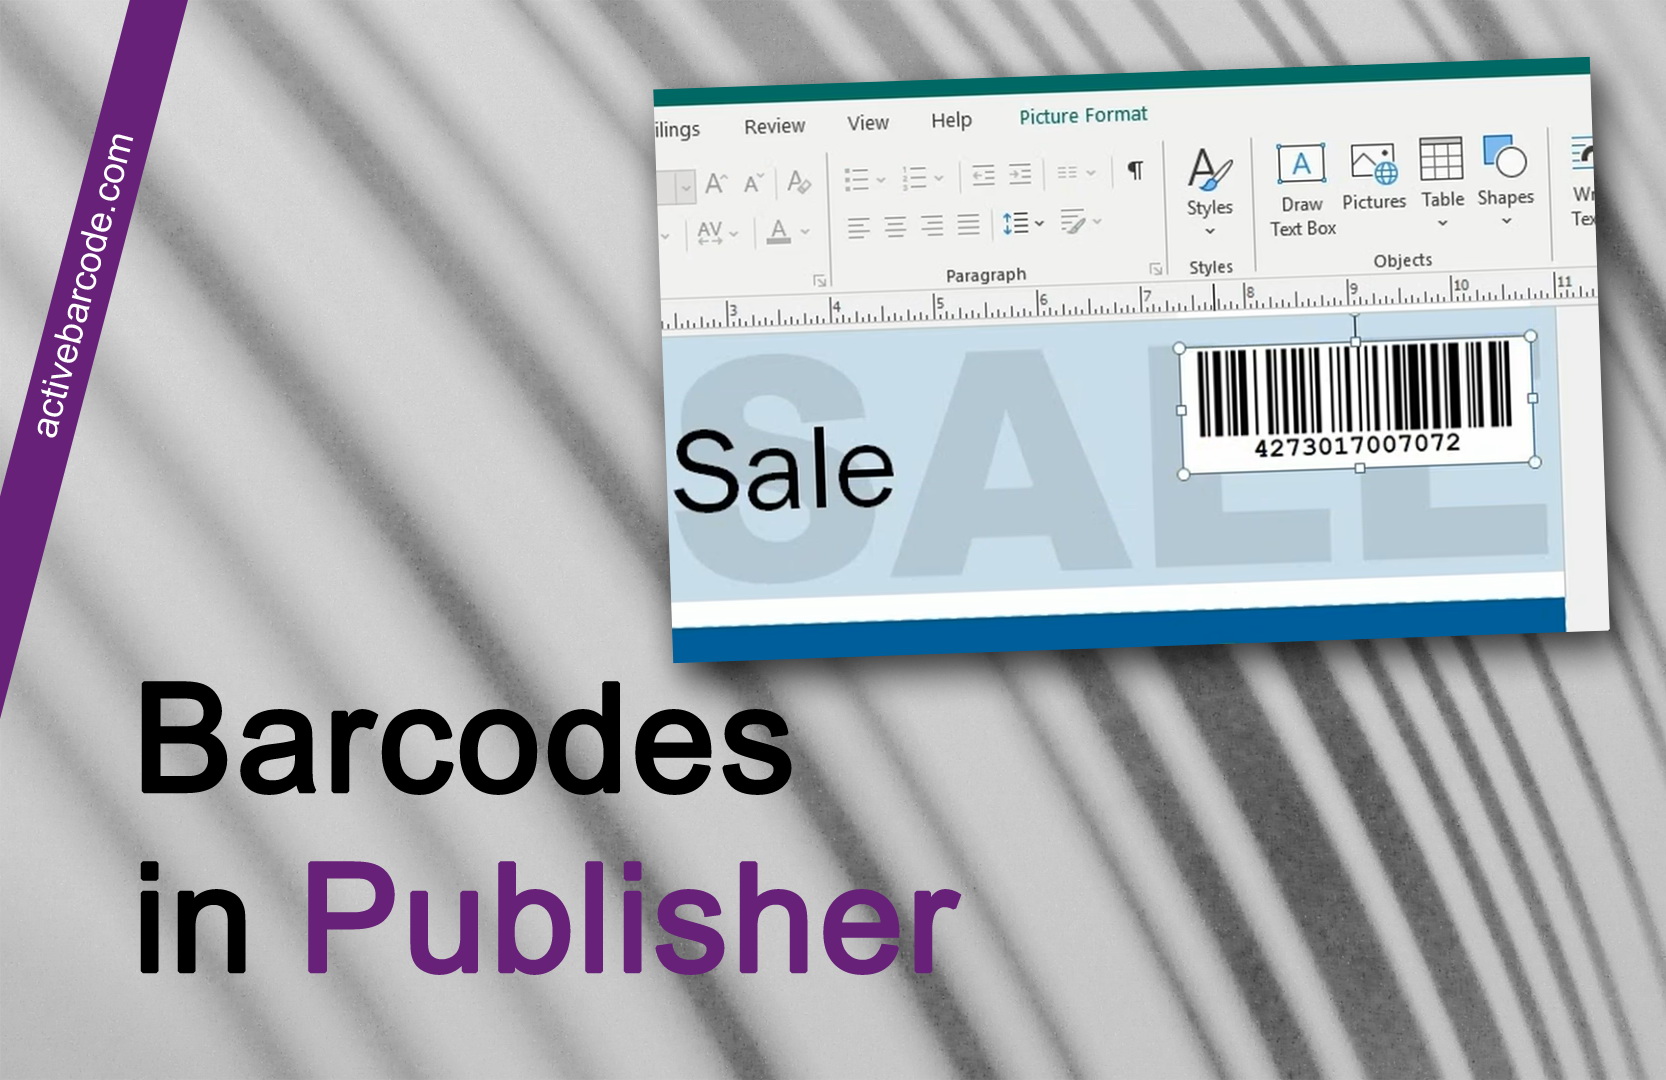 ActiveBarcode: How to add a barcode to a MS Publisher document